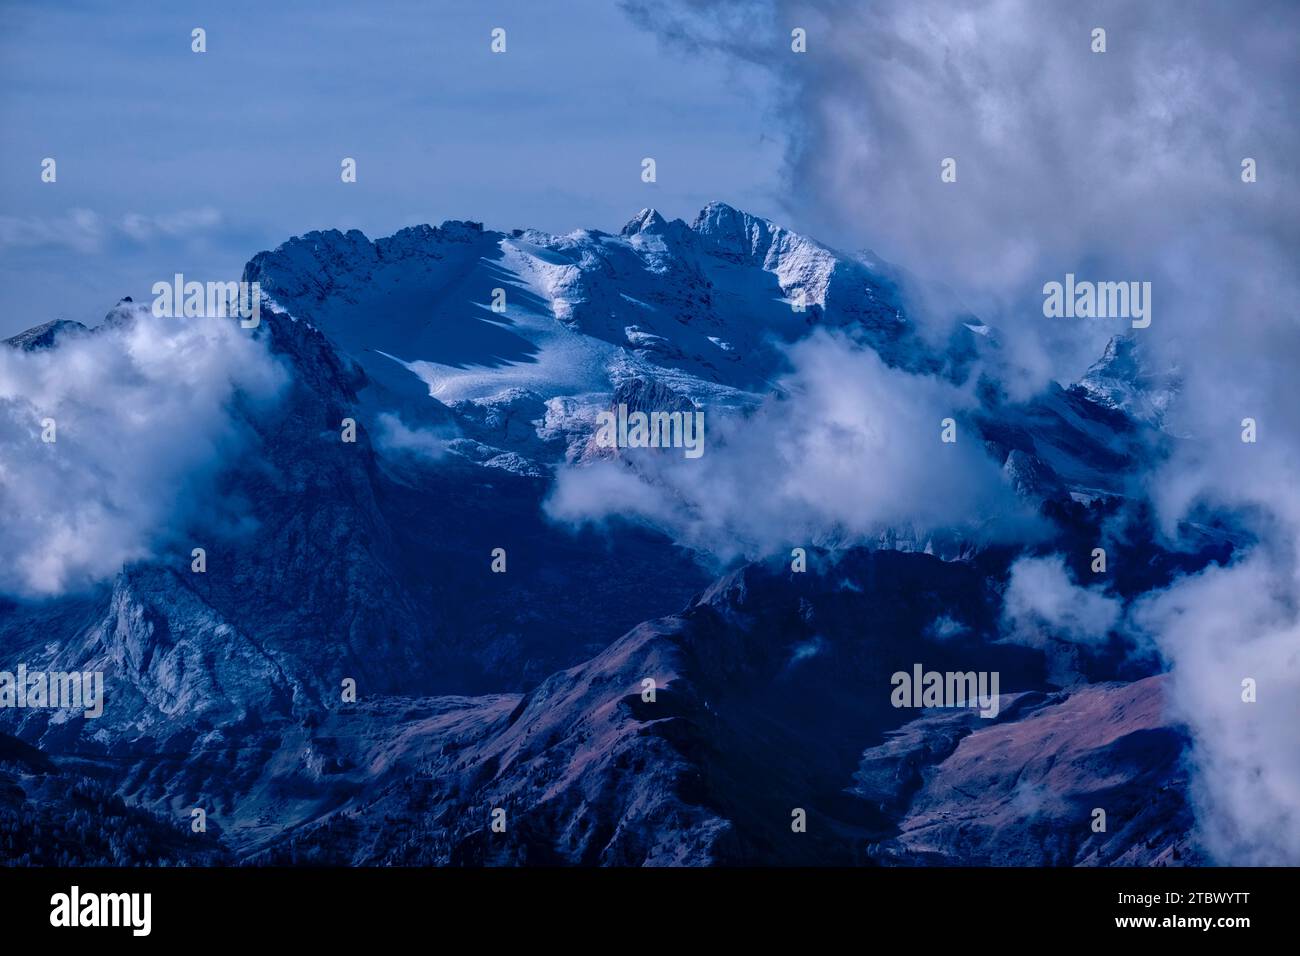 The rock formation Marmolada, covered in snow and clouds in autumn, seen from Passo Falzarego. Stock Photo